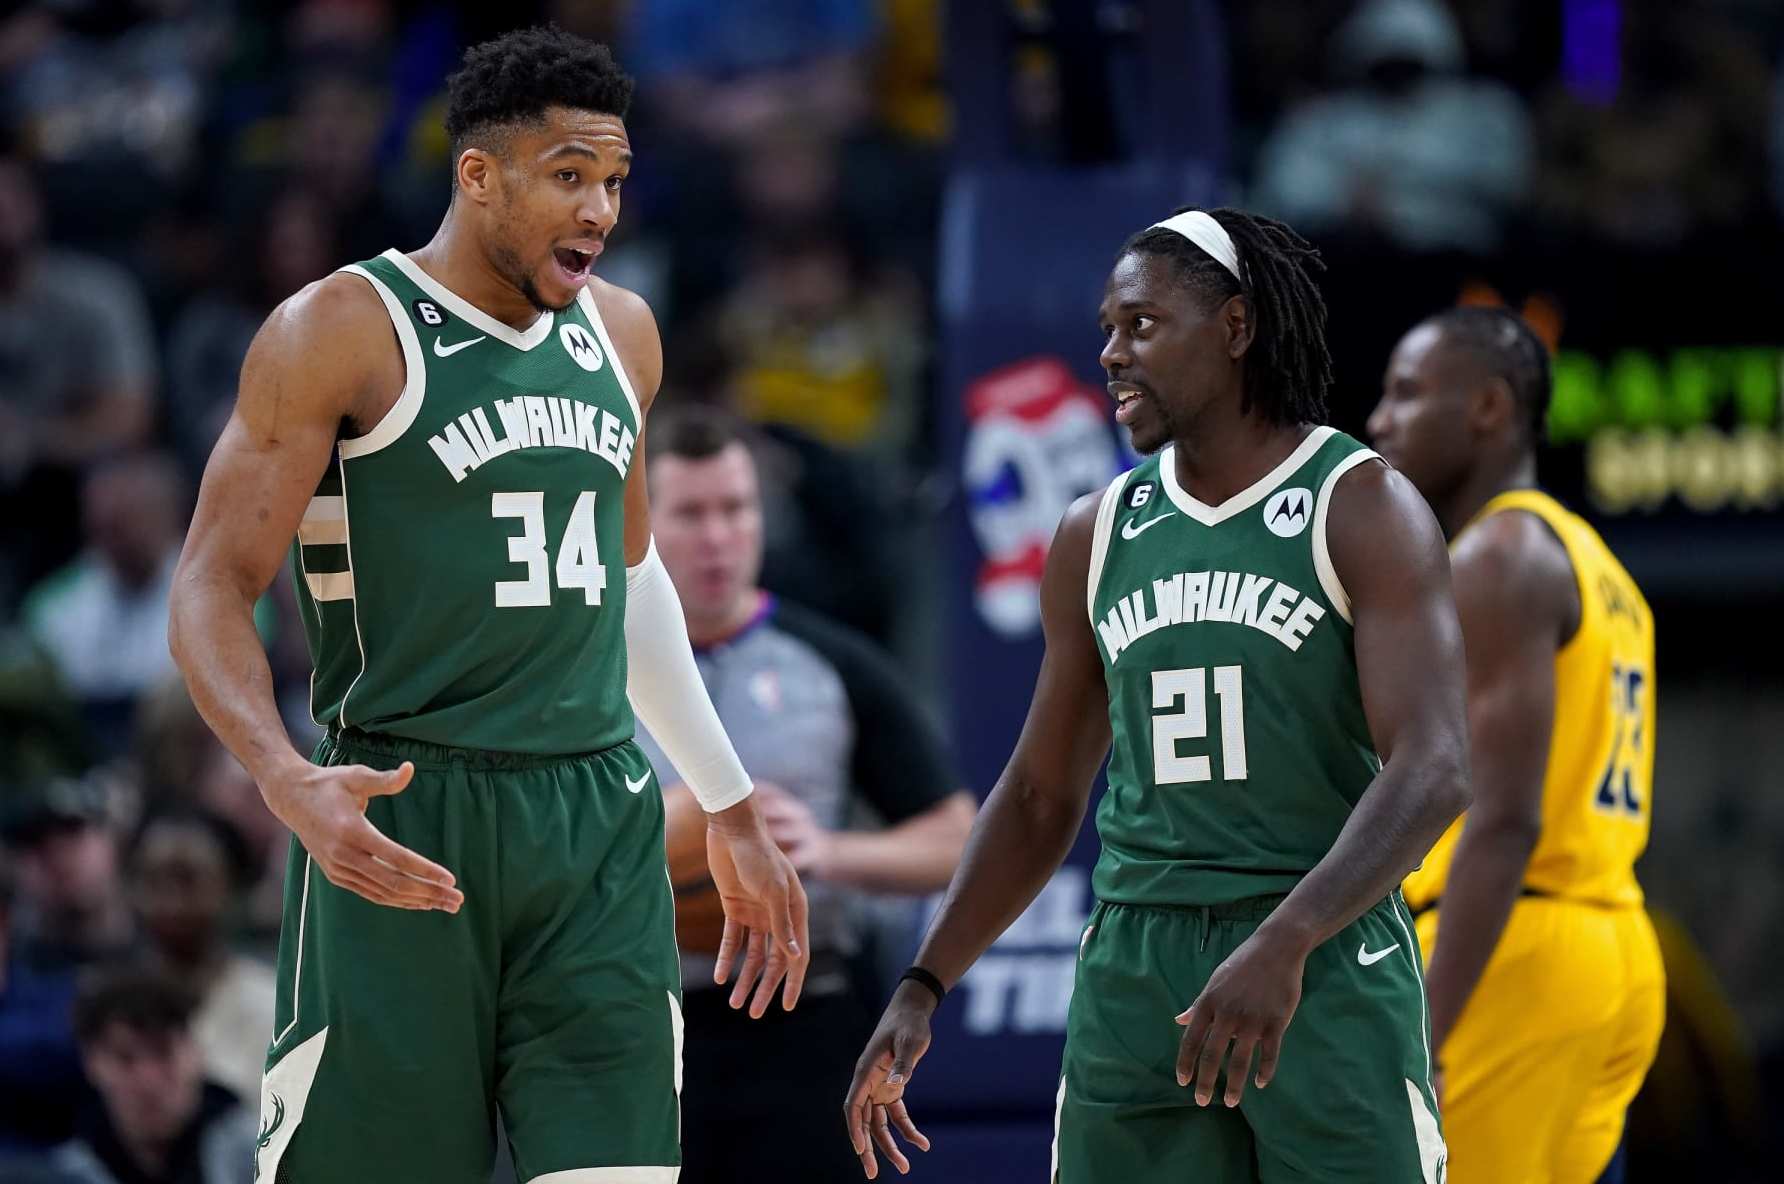 With Unlimited Potential, Alex Antetokounmpo Hype Growing to